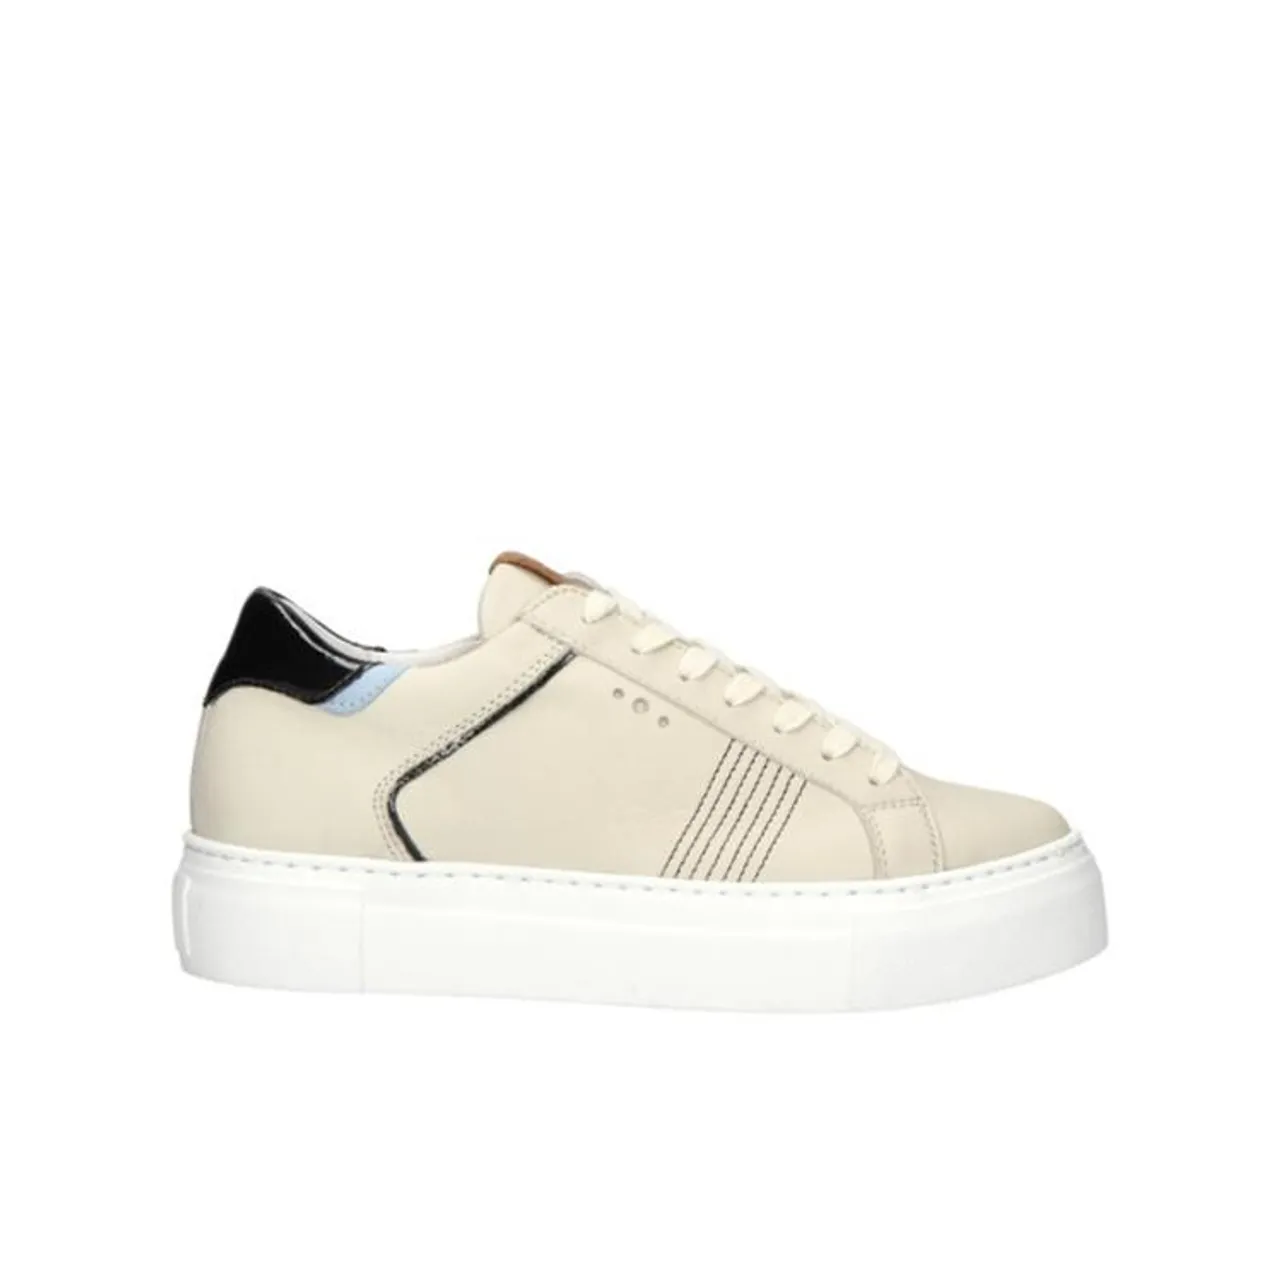 AQA Shoes A8295 Sneakers